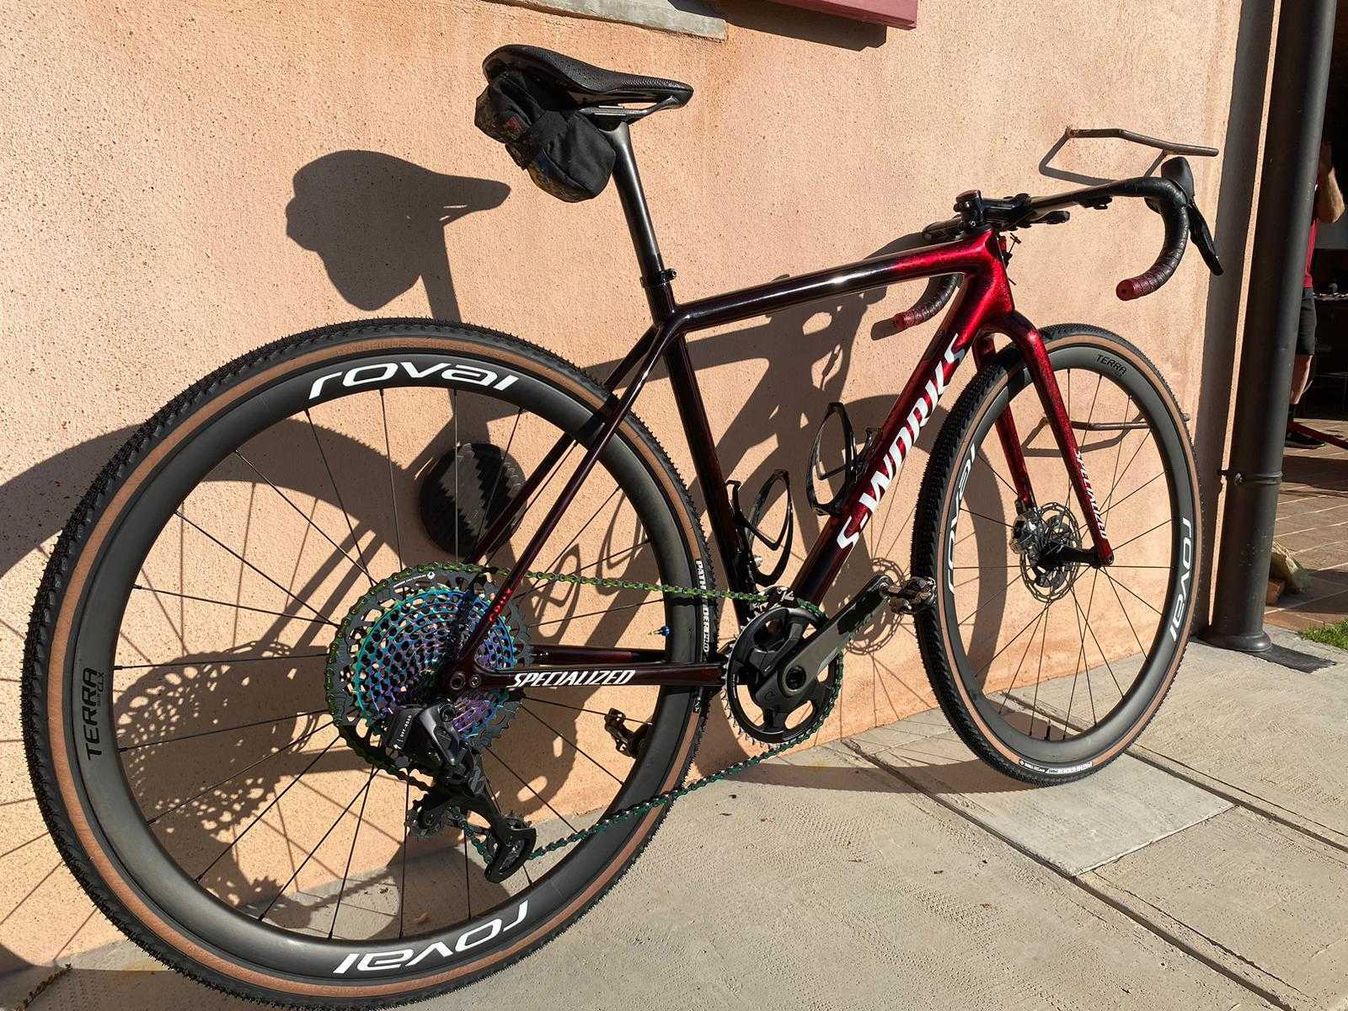 The Specialized S-Works Crux is seriously lightweight